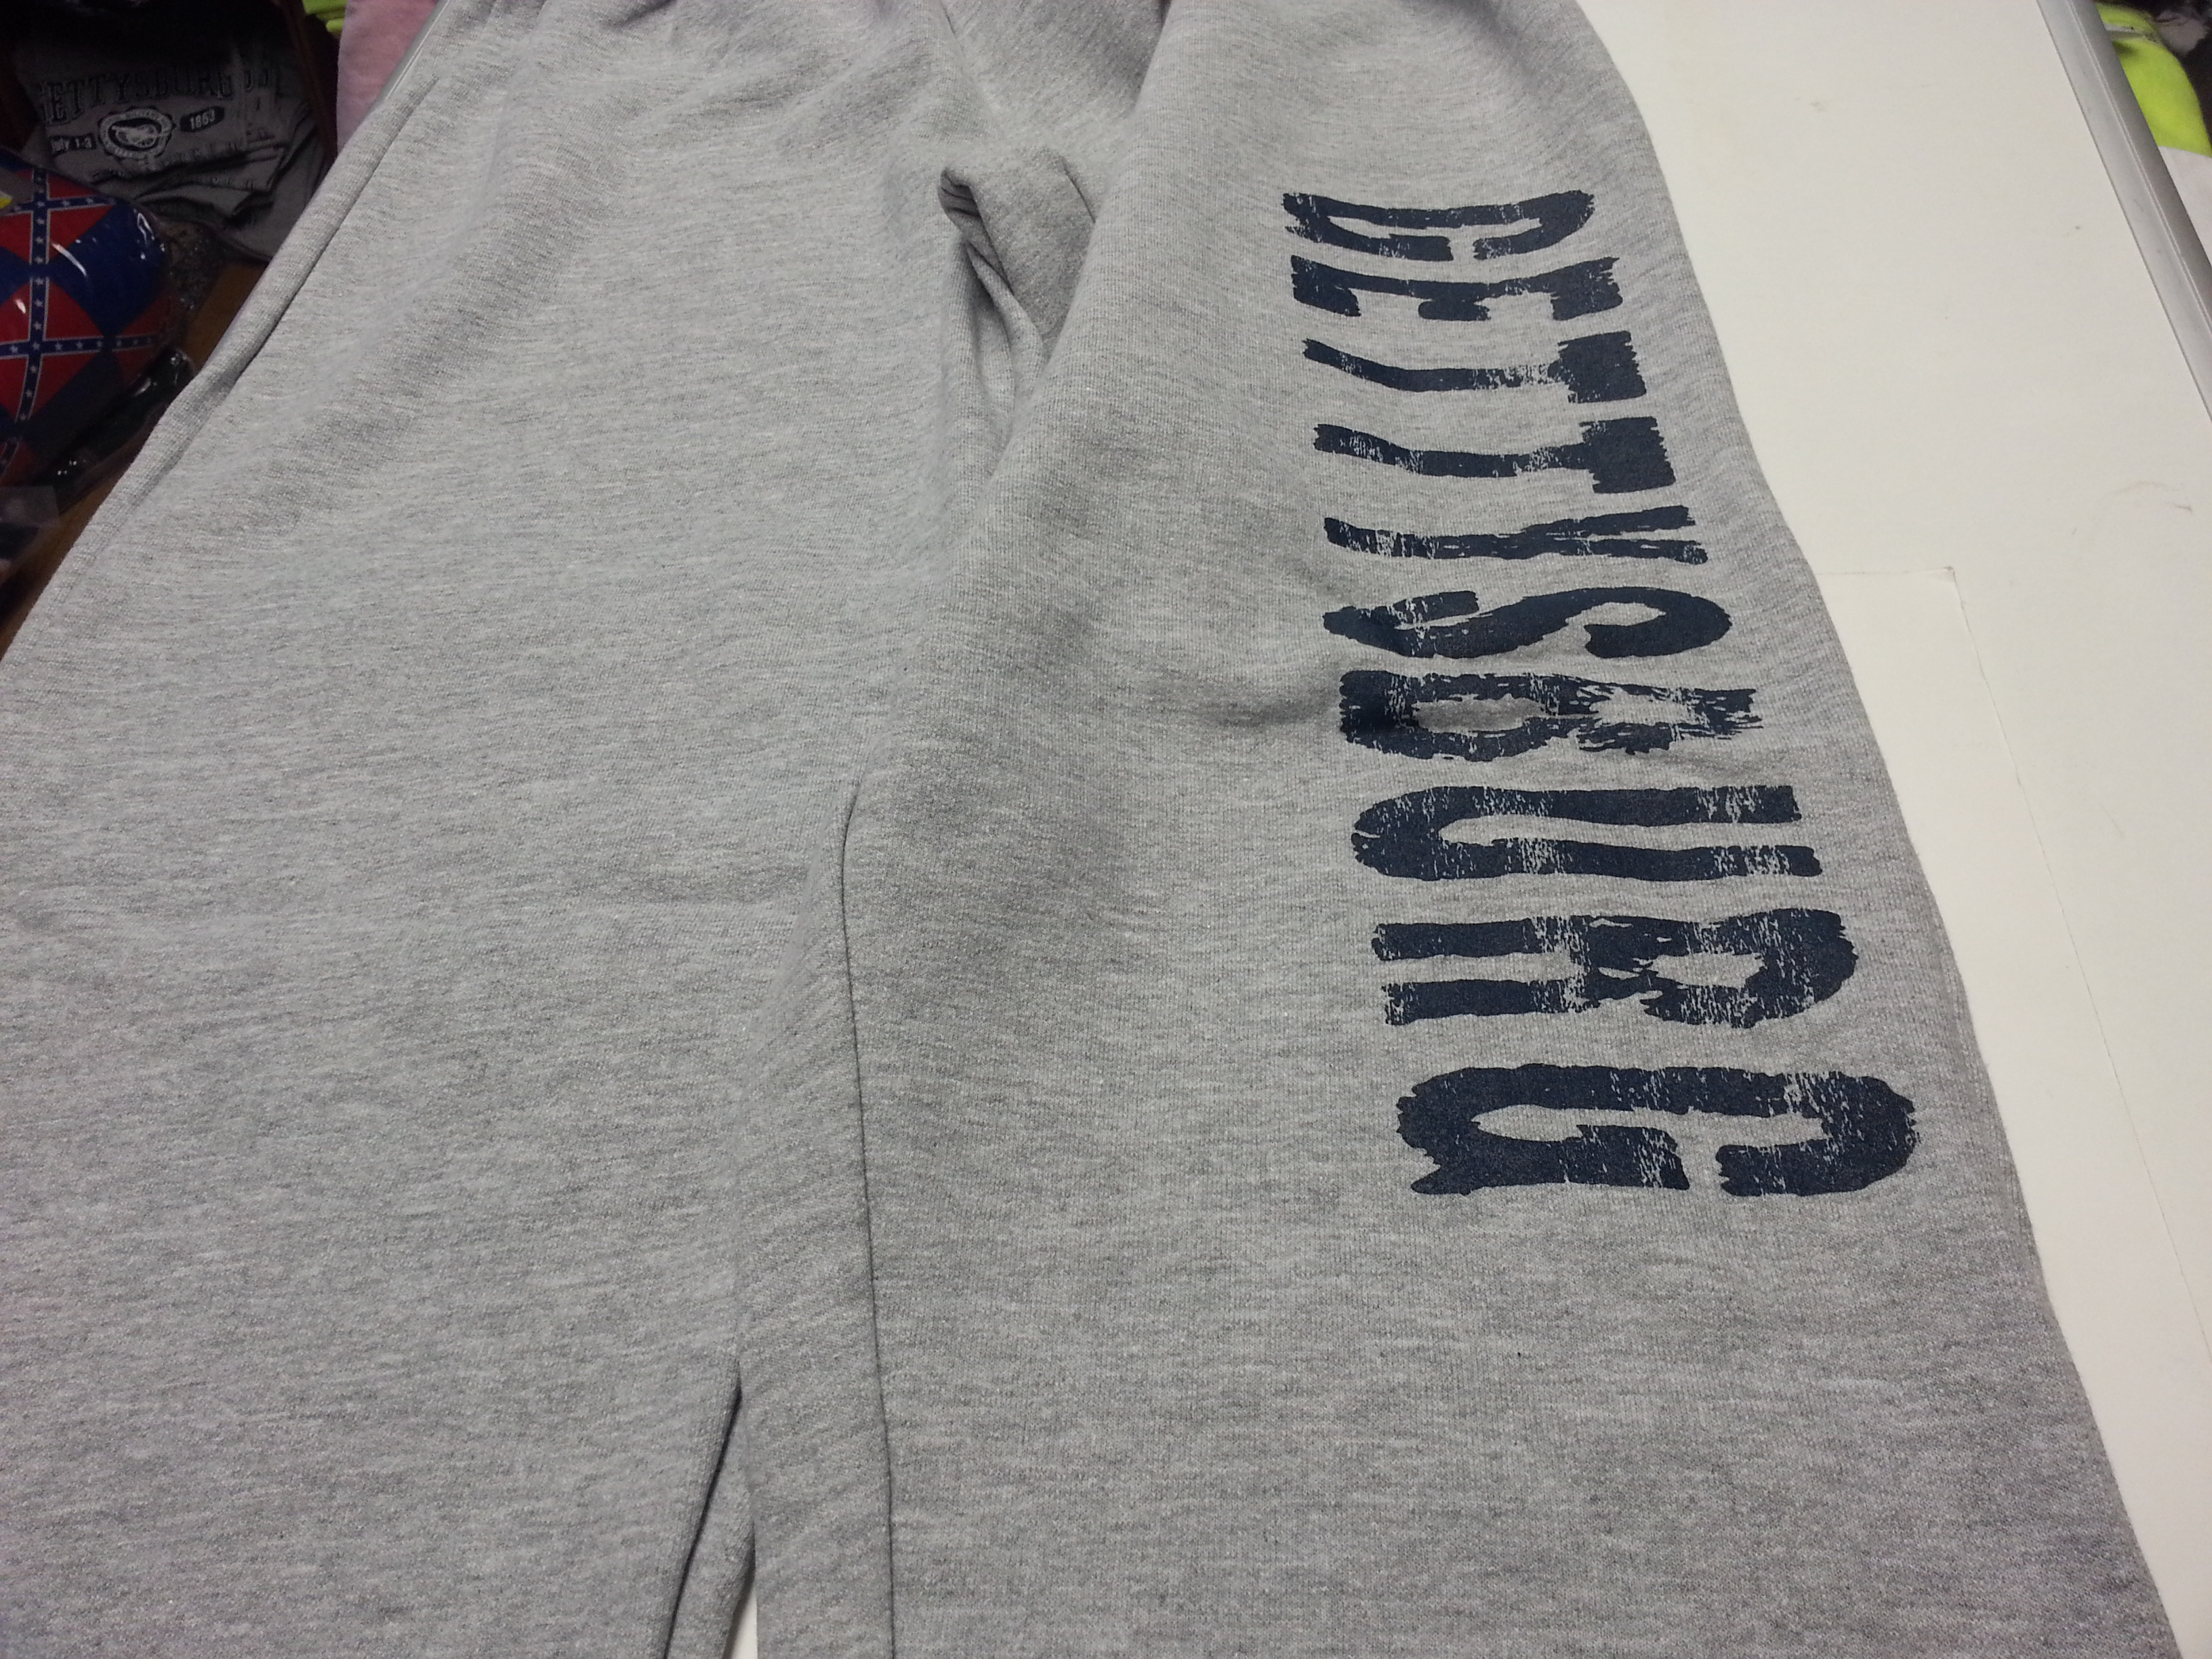 GETTYSBURG GRAY SWEATPANTS WITH NAVY LETTERS | Gettysburg Souvenirs & Gifts